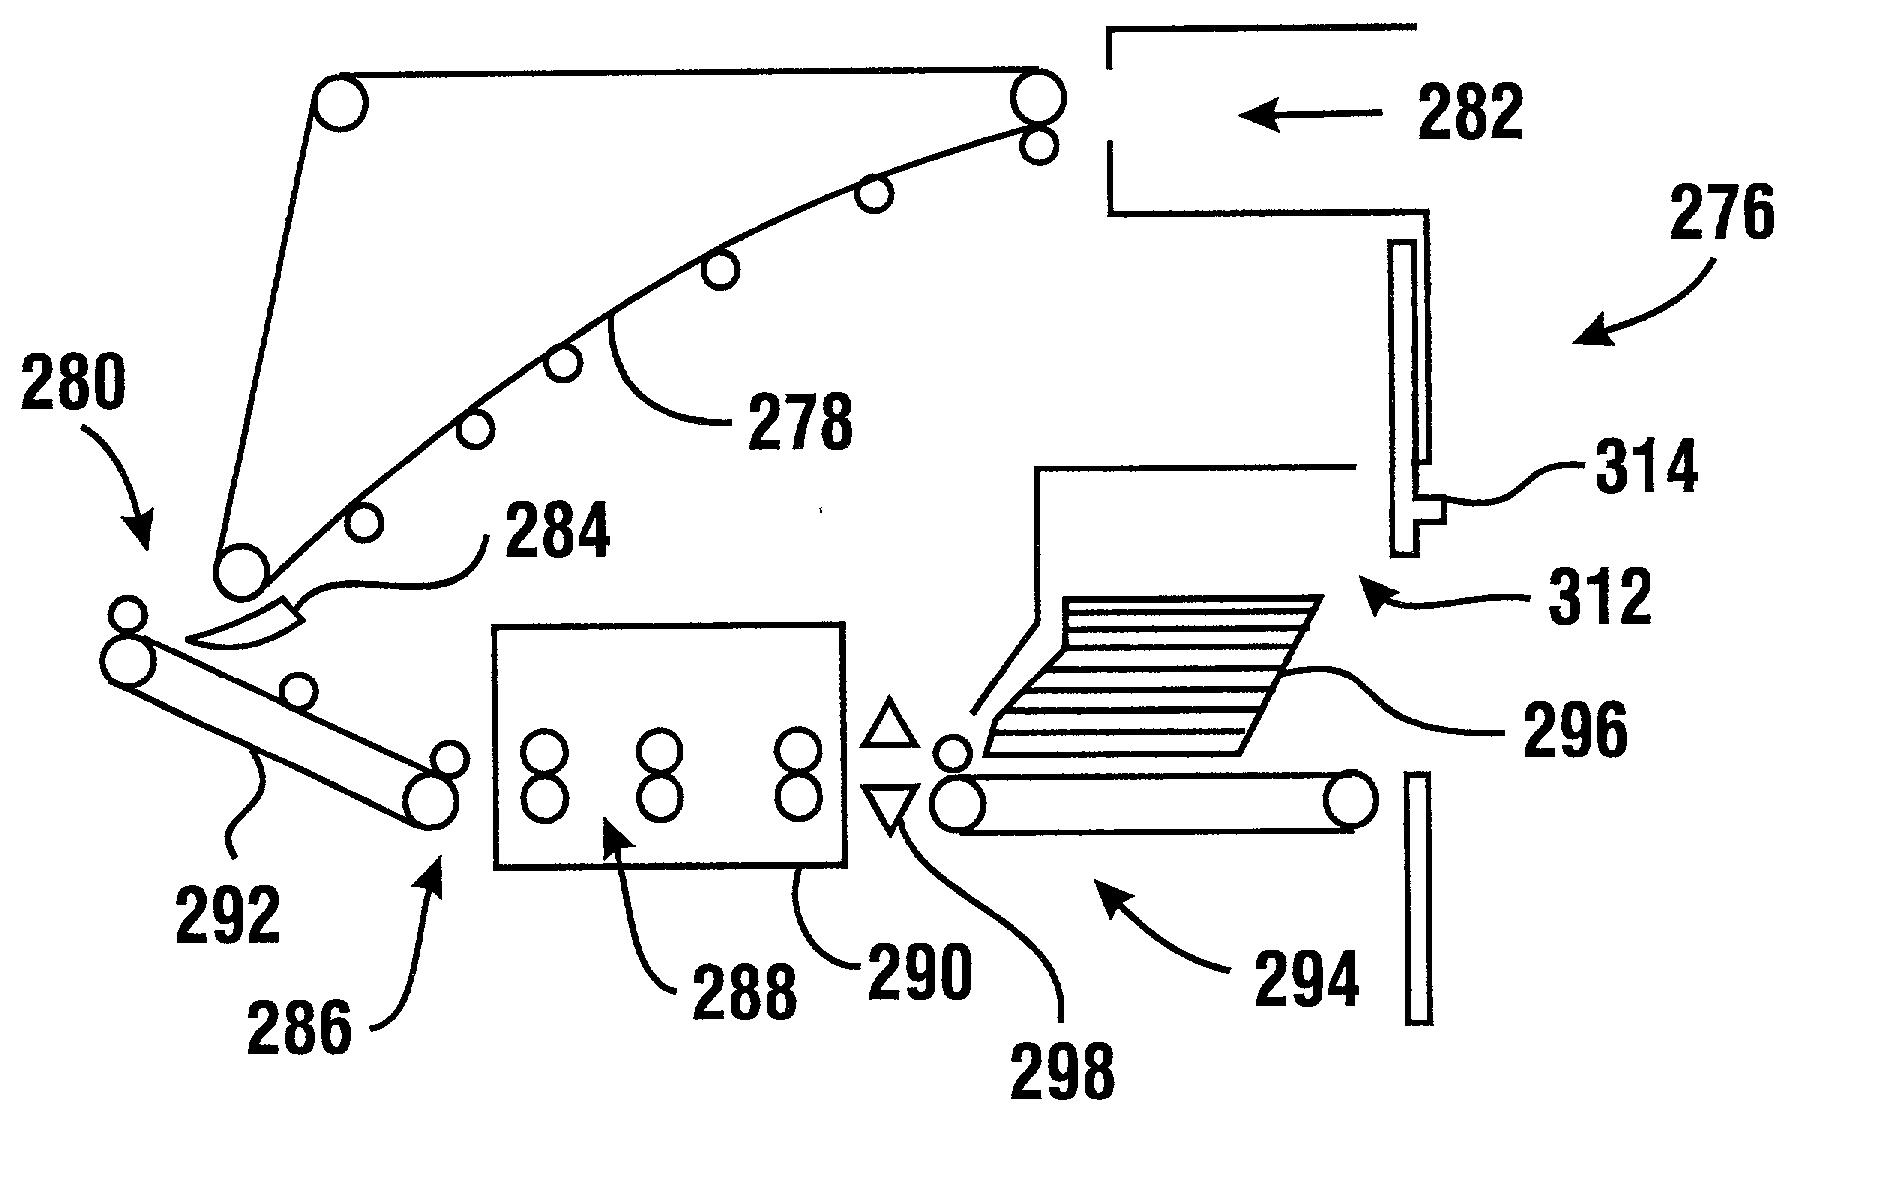 Automated transaction machine with sheet accumulator and presenter mechanism